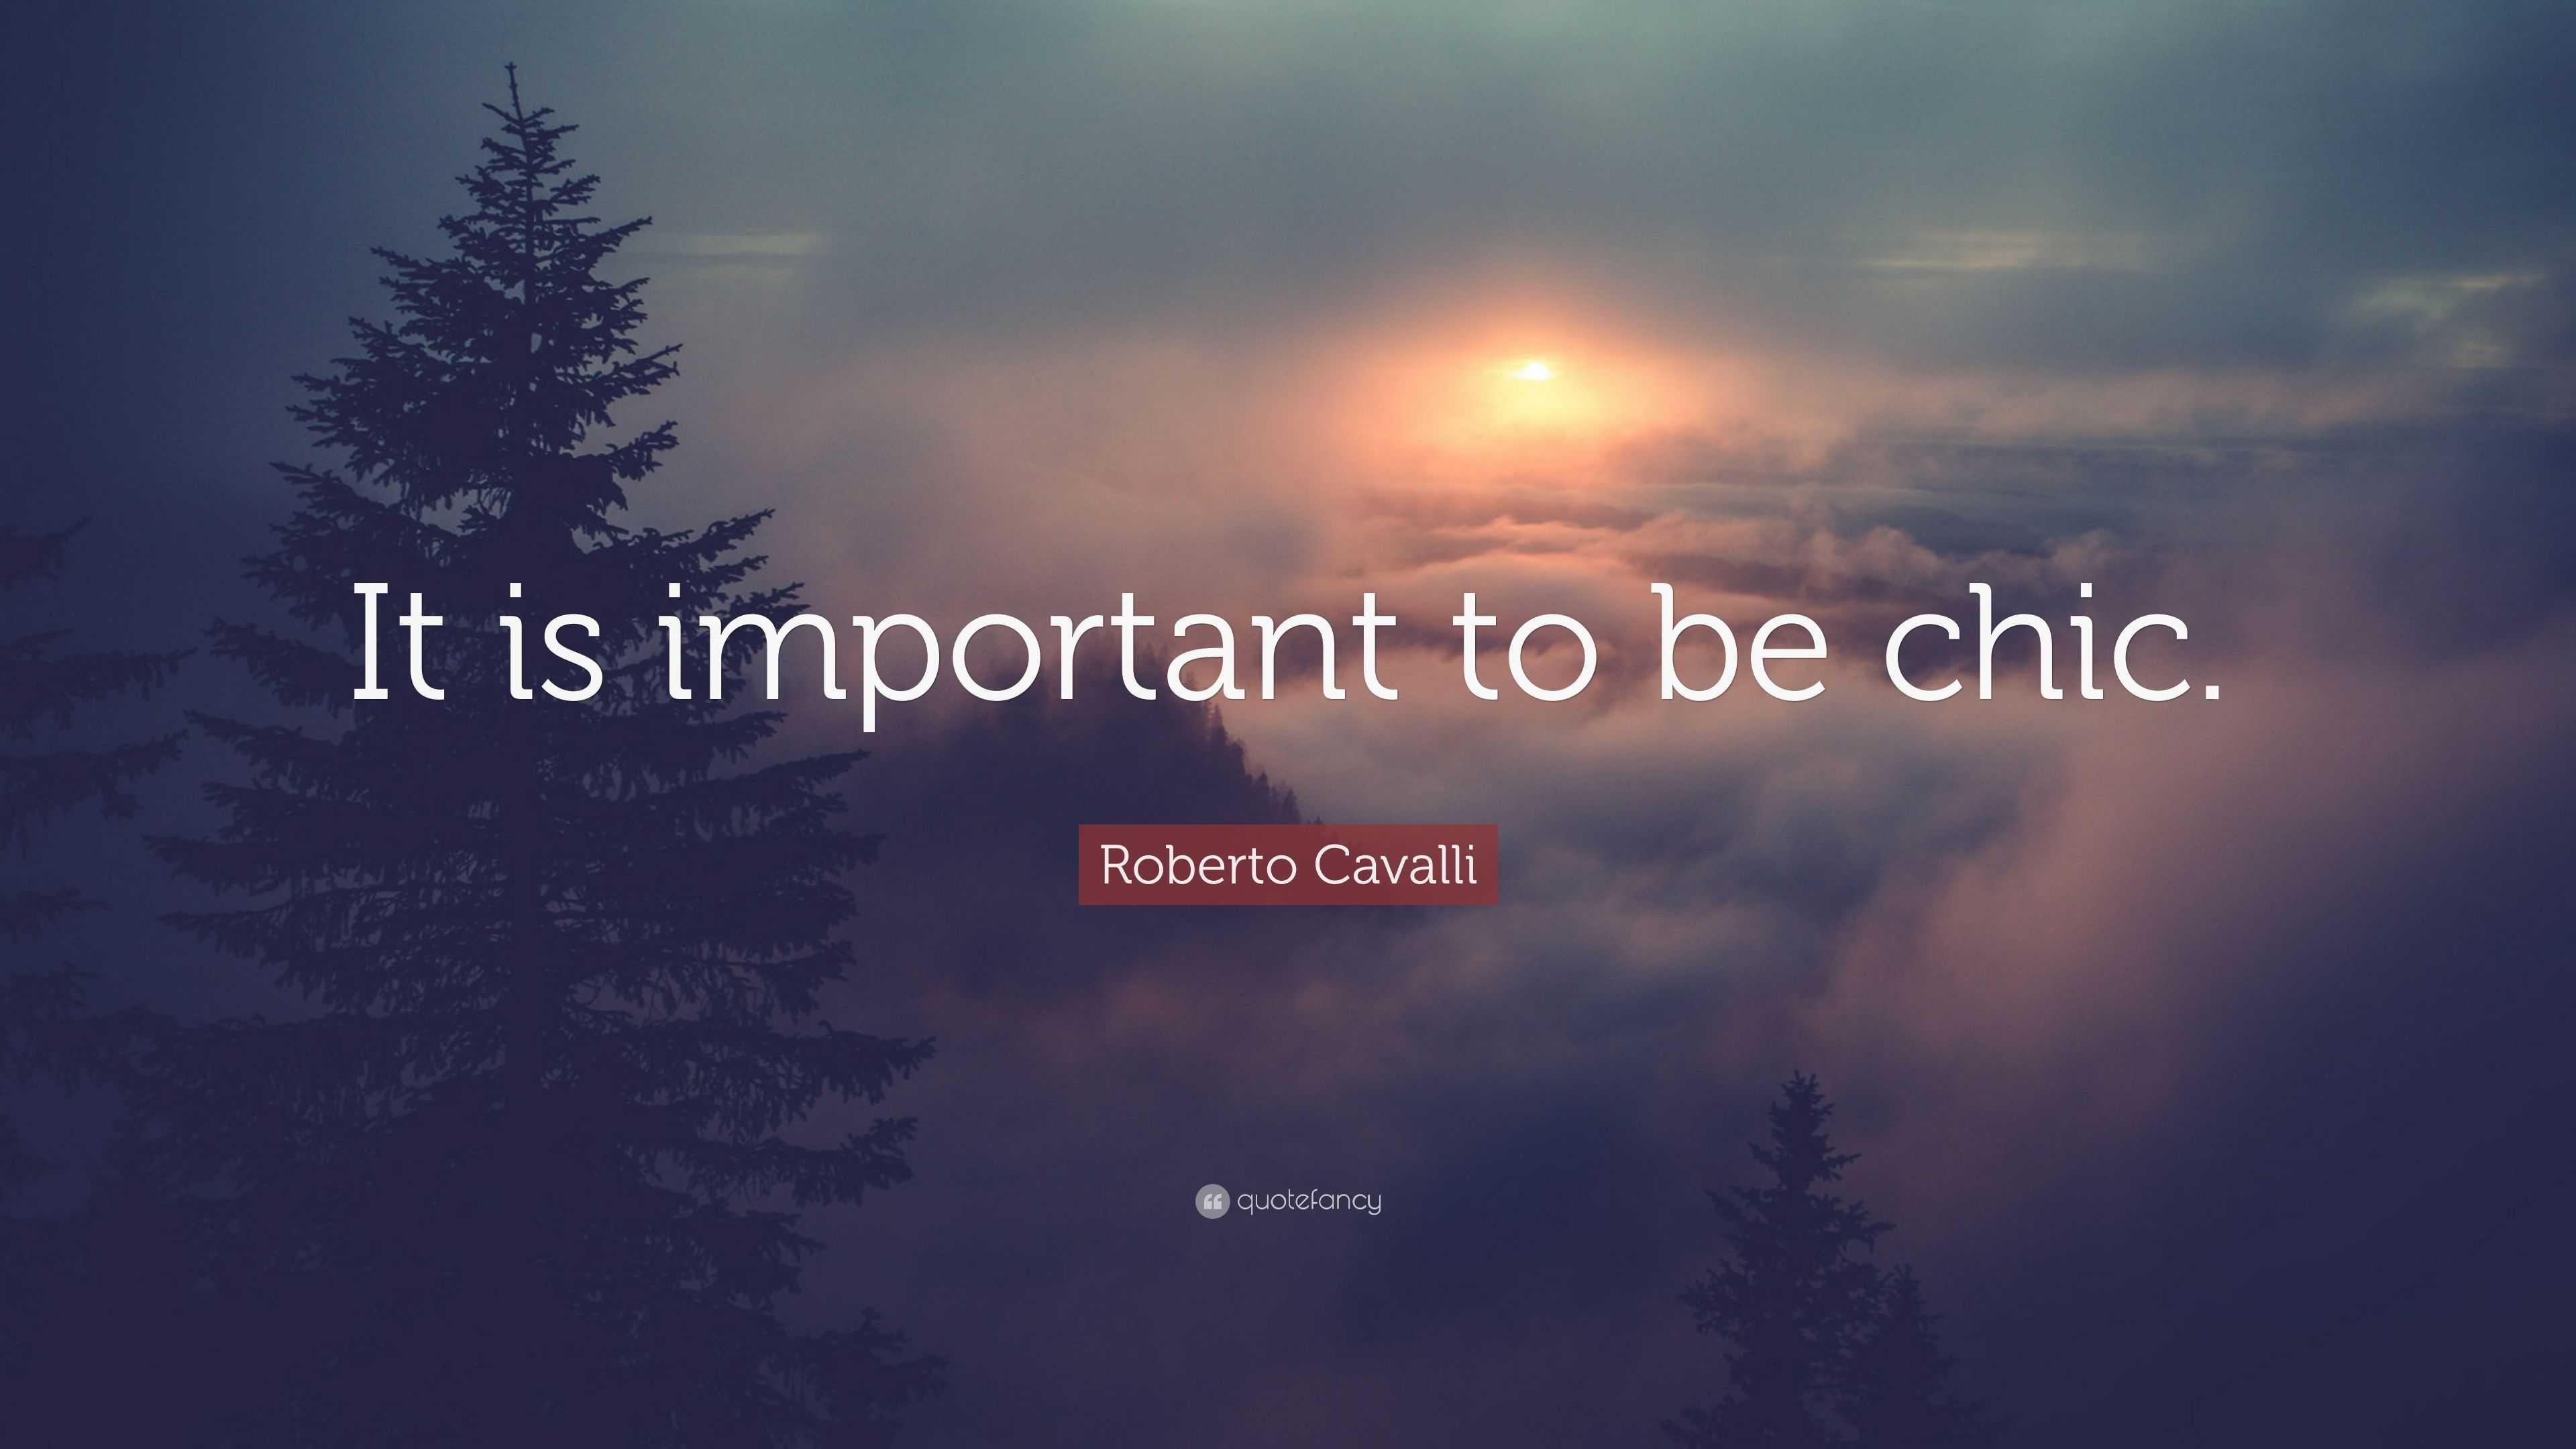 Roberto Cavalli Quote: “It is important to be chic.”